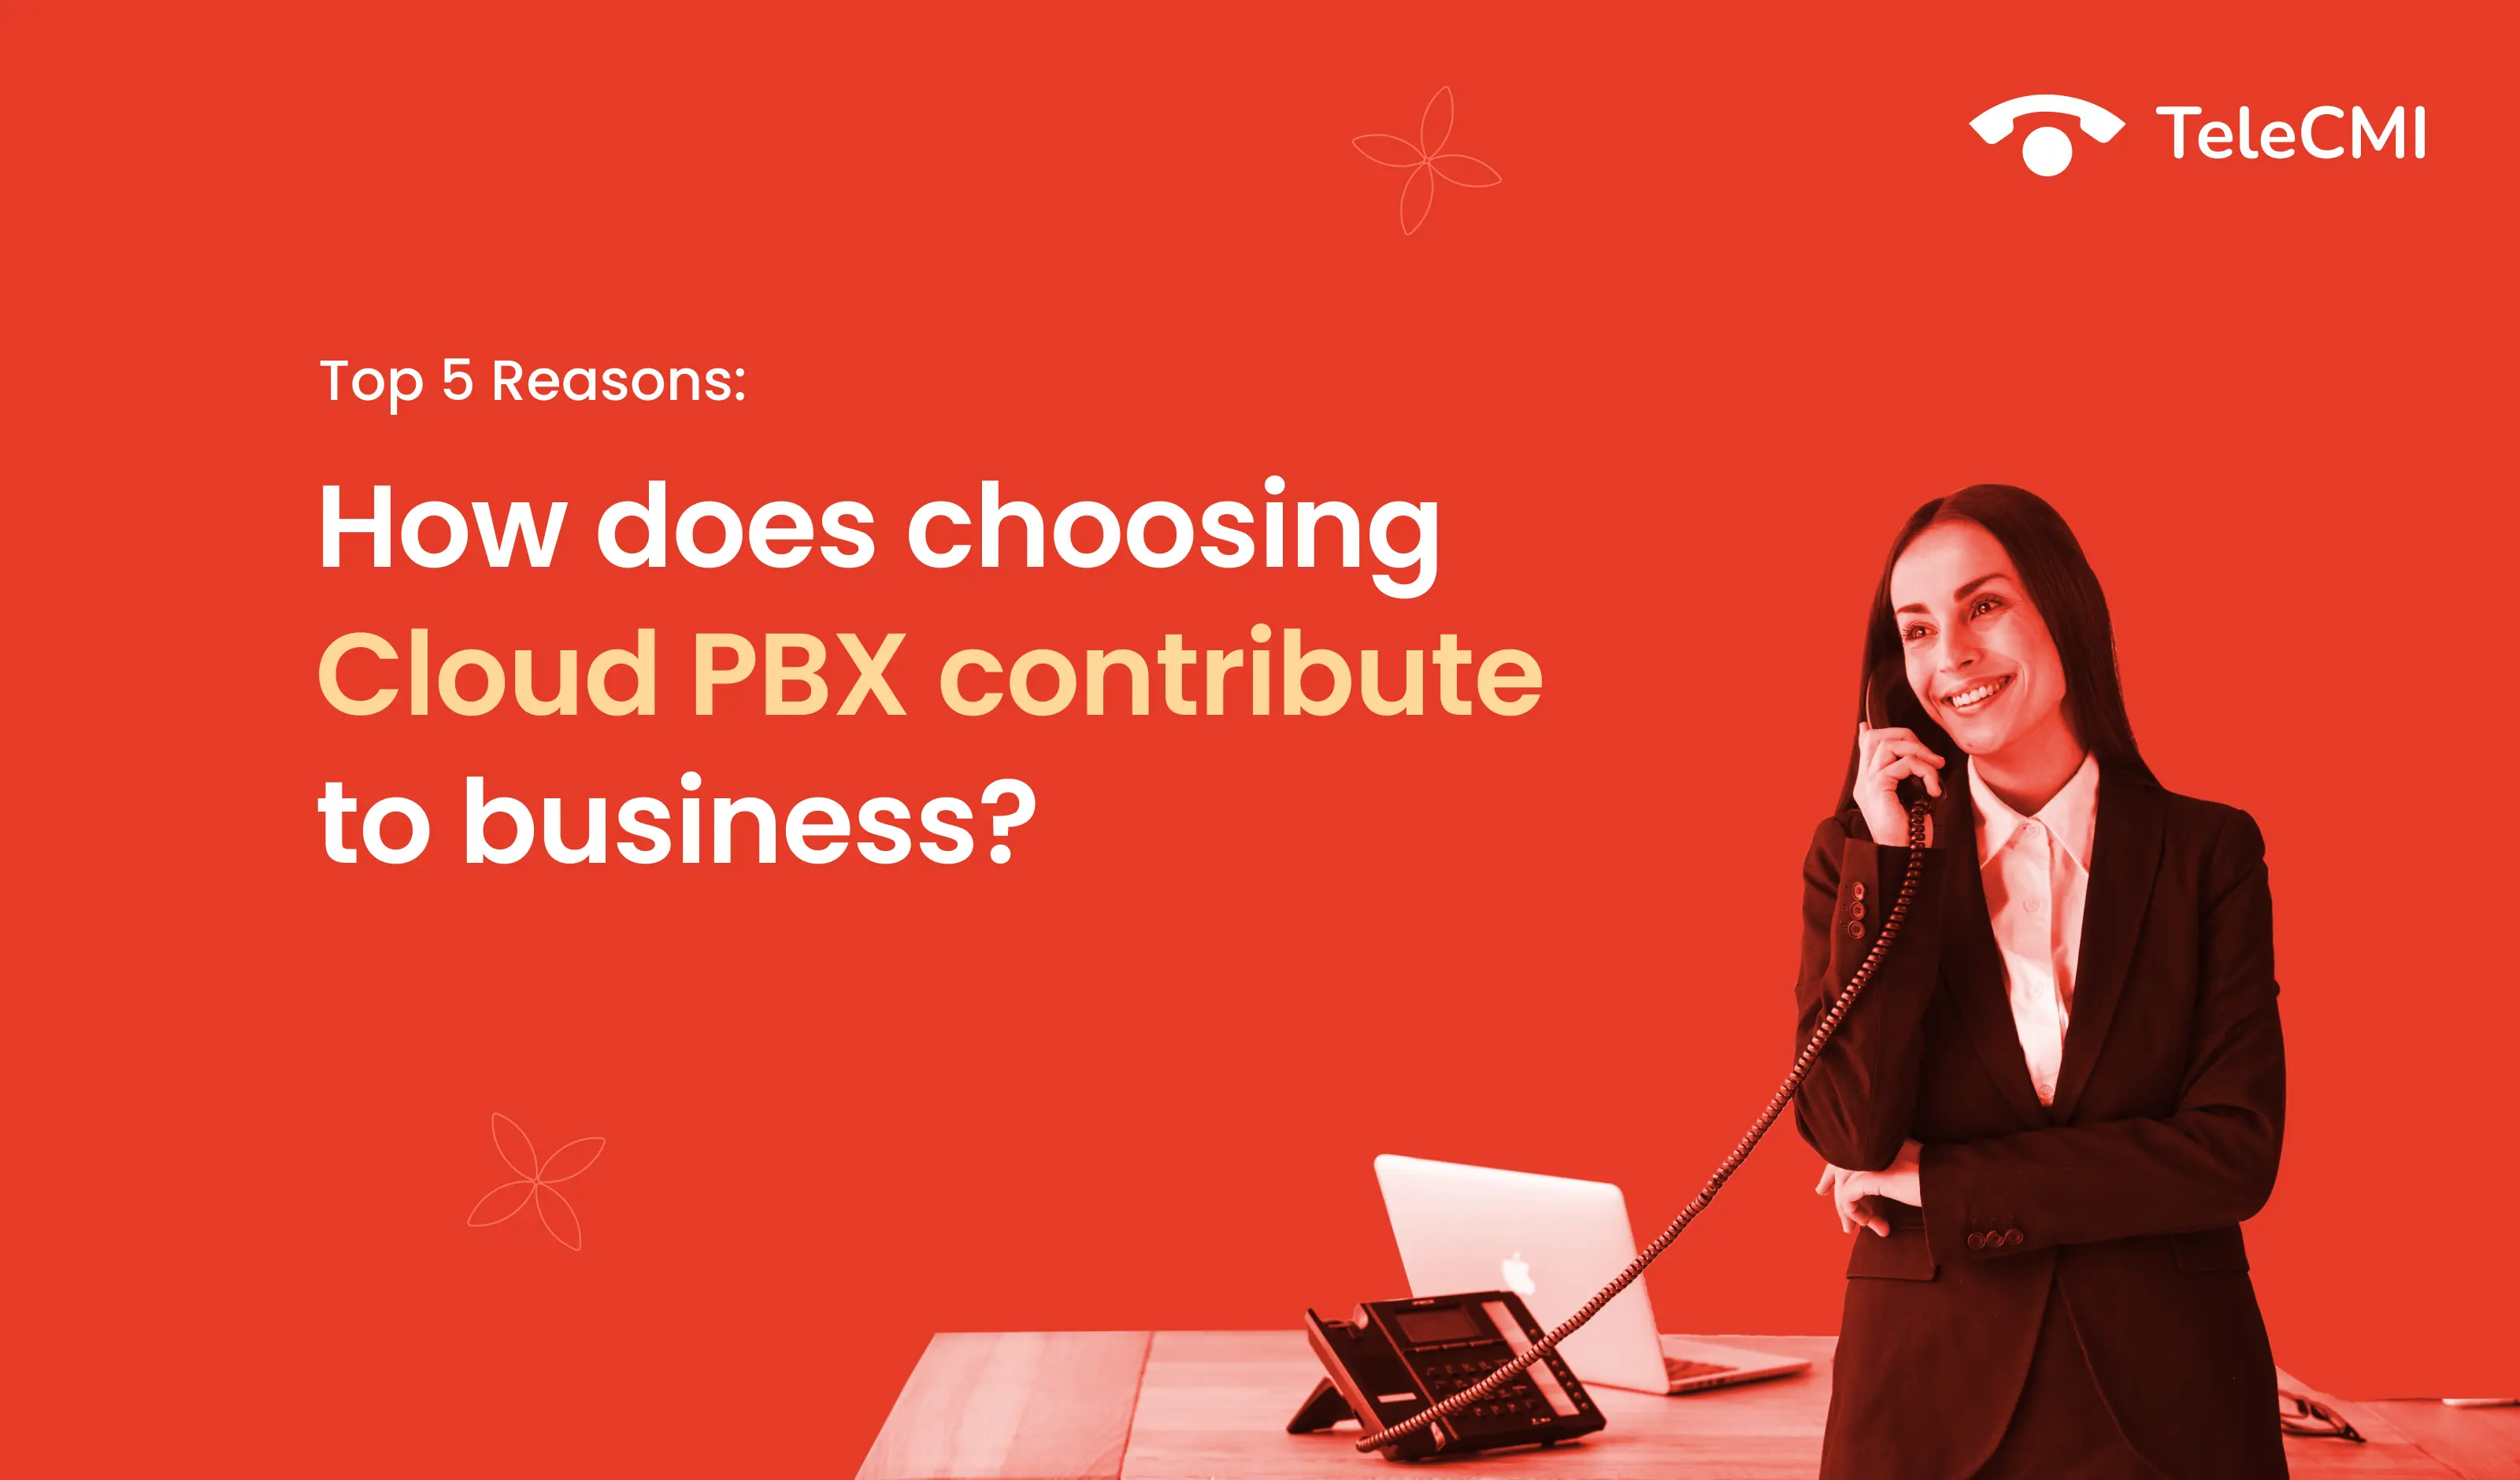 Top 5 Reasons: How Does Choosing Cloud PBX Contribute
            to Business Success?